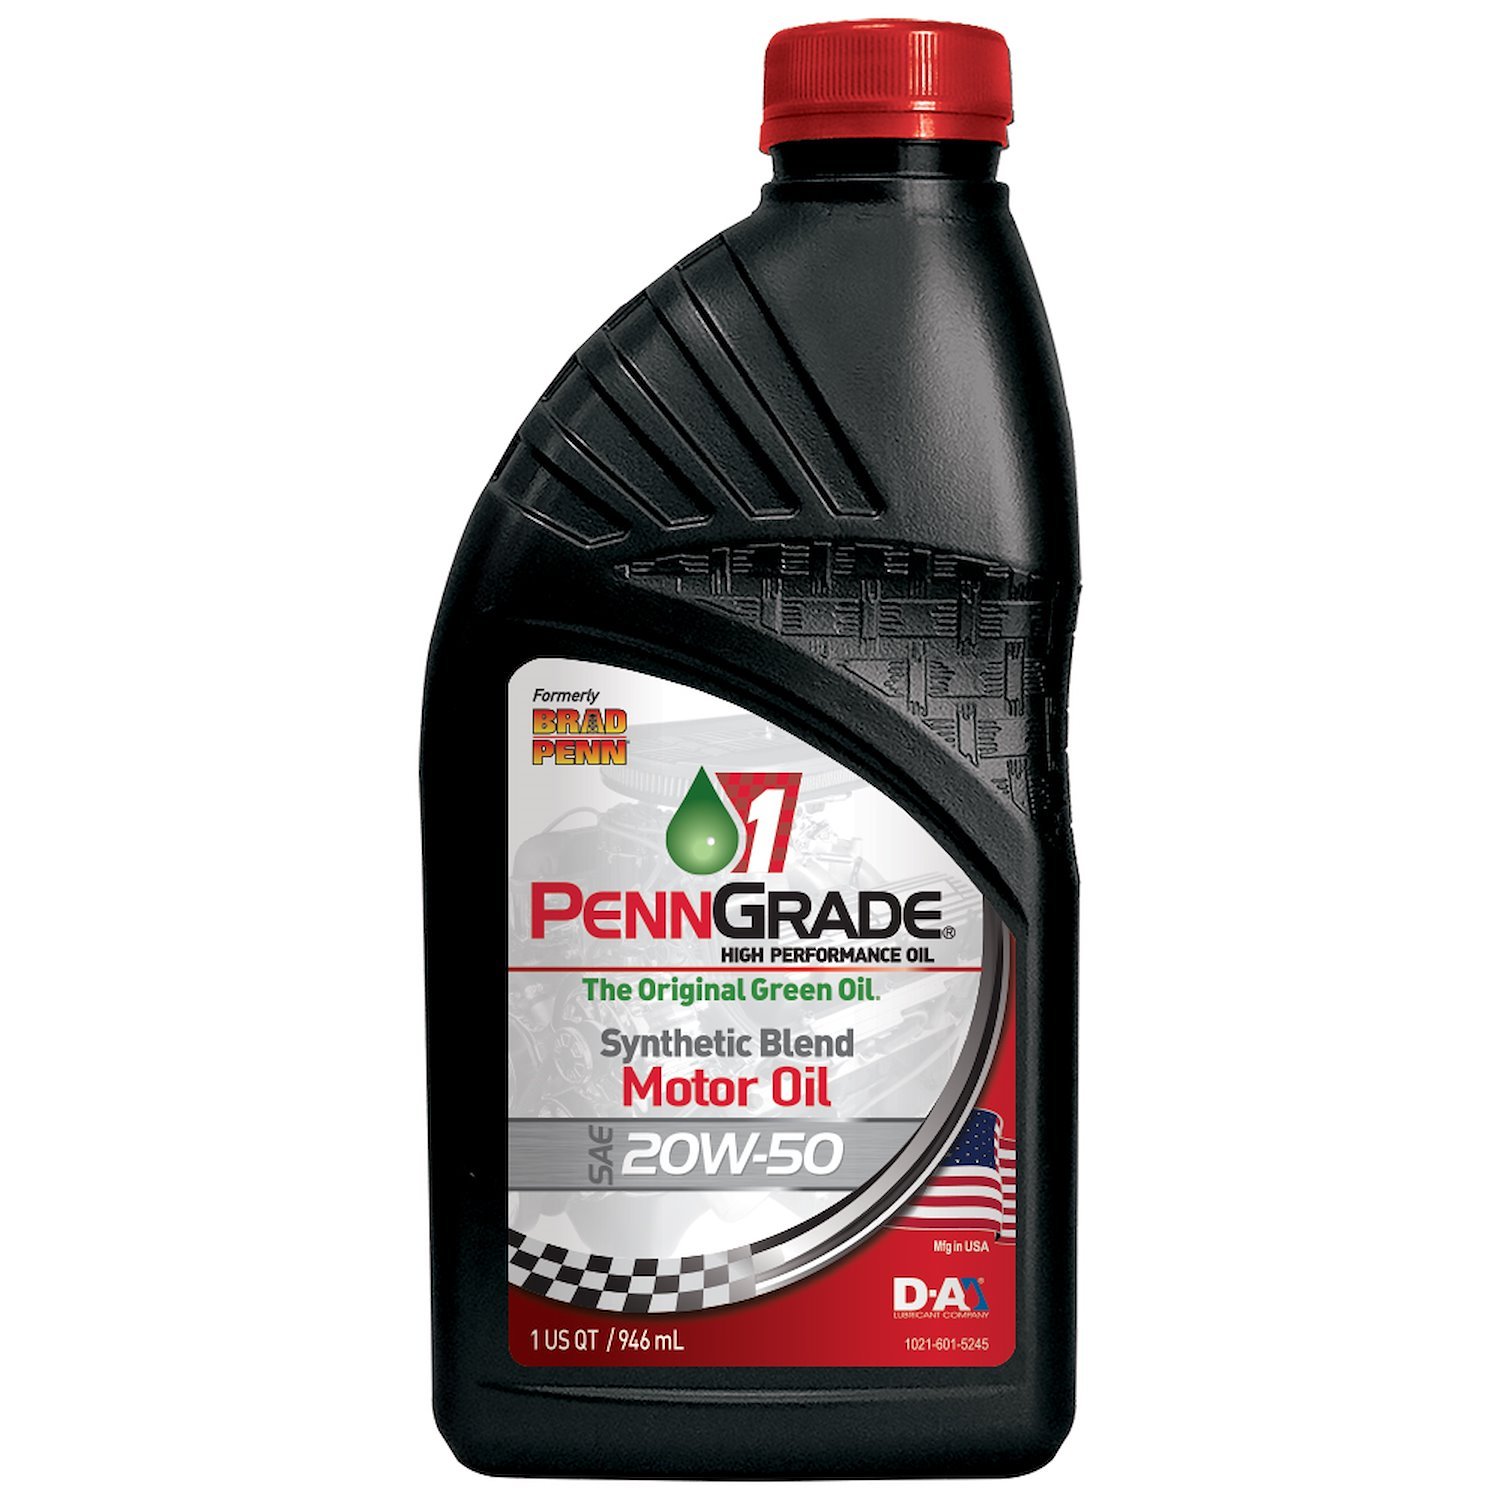 Penn-Grade 1 Partial Synthetic Motor Oil SAE 20W-50 - 12 Qts